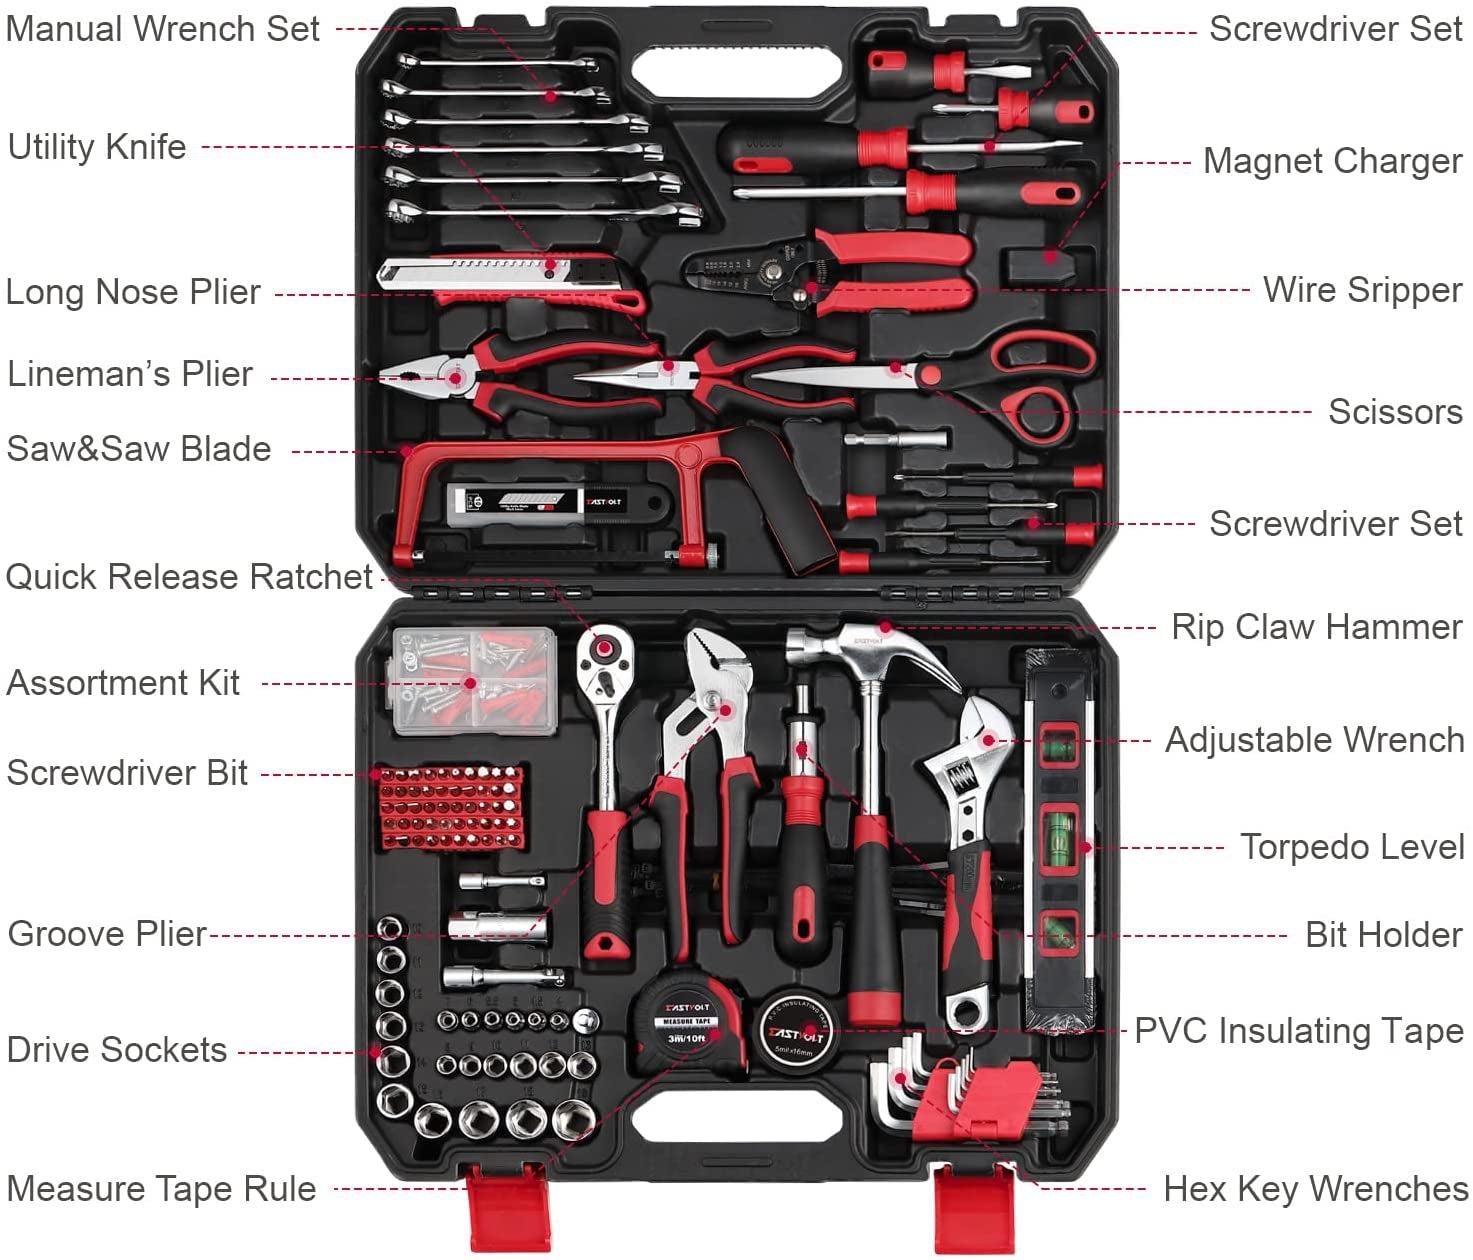 Eastvolt, Eastvolt 218-Piece Household Tool Kit, Auto Repair Tool Set, Tool Kits for Homeowner, General Household Hand Tool Set with Hammer, Plier, Screwdriver Set, Socket Kit and Toolbox Storage Case.